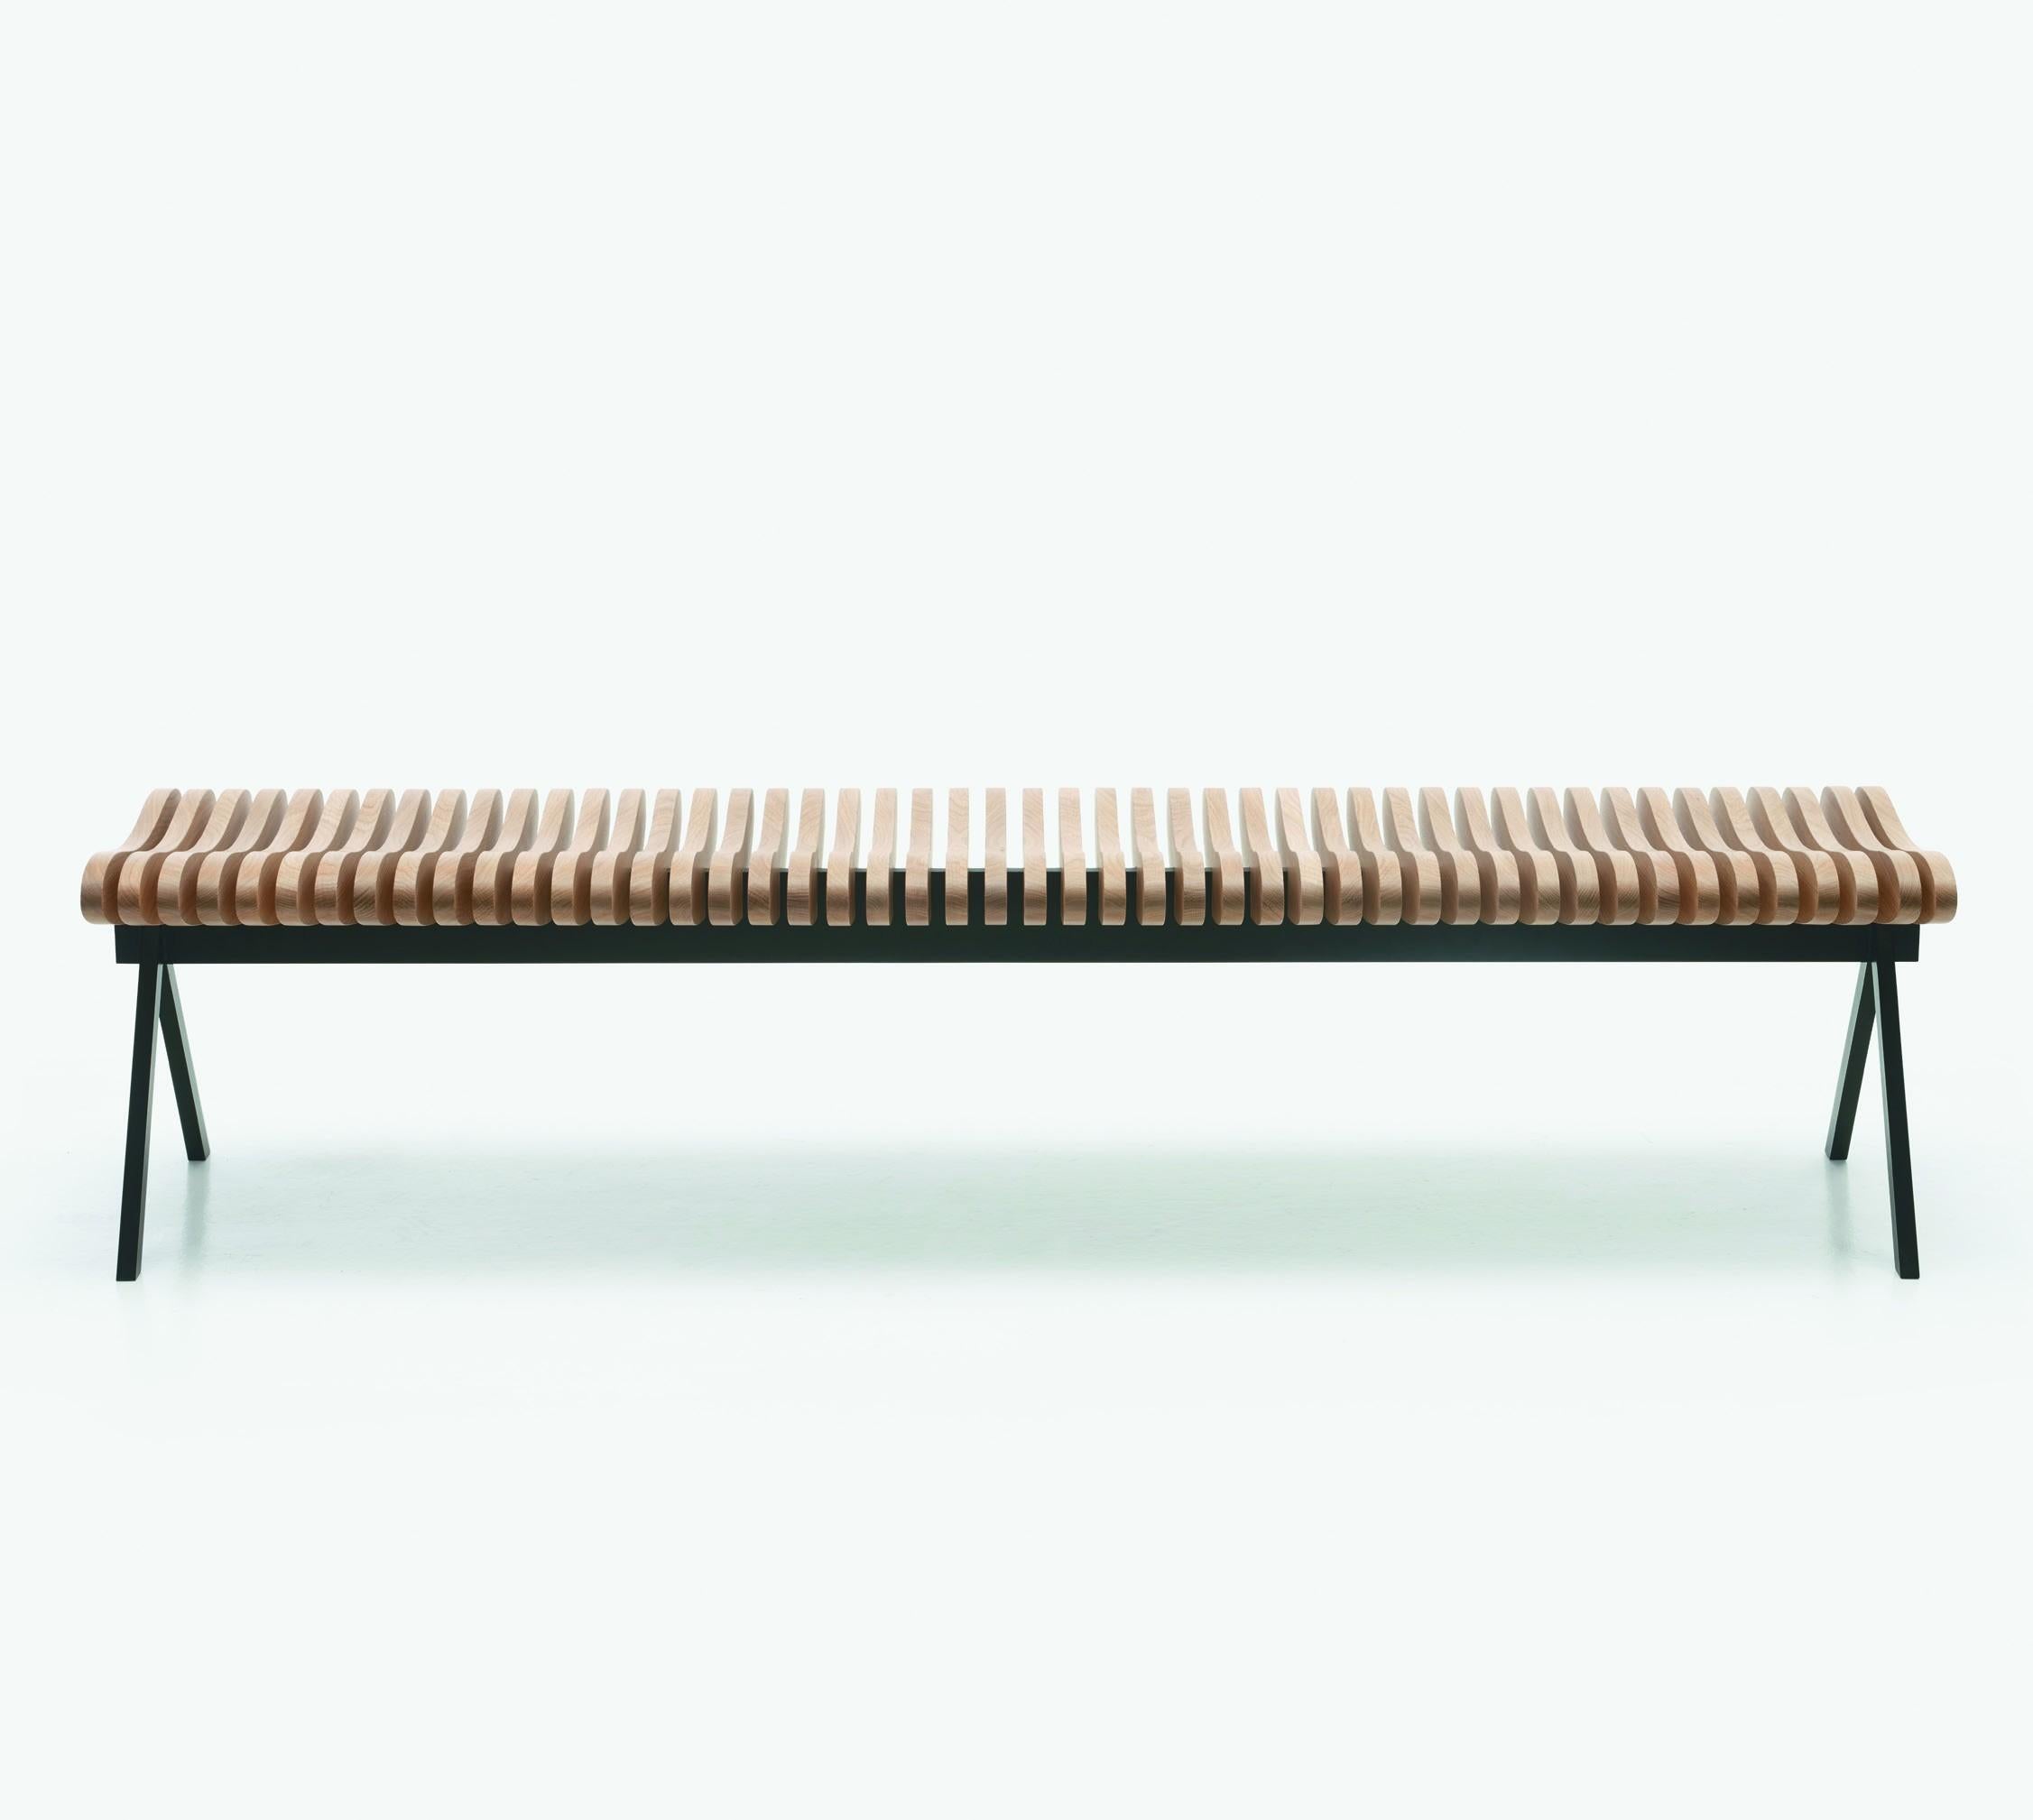 Perlude oak bench large by Caroline Voet
Dimensions: 190 x H 43 cm
Materials: Natural oak
Also available in seating oak black, seating walnut natural, seating teak (outdoor).

The Perlude benches are assembled from top grade FSC-labelled wood,